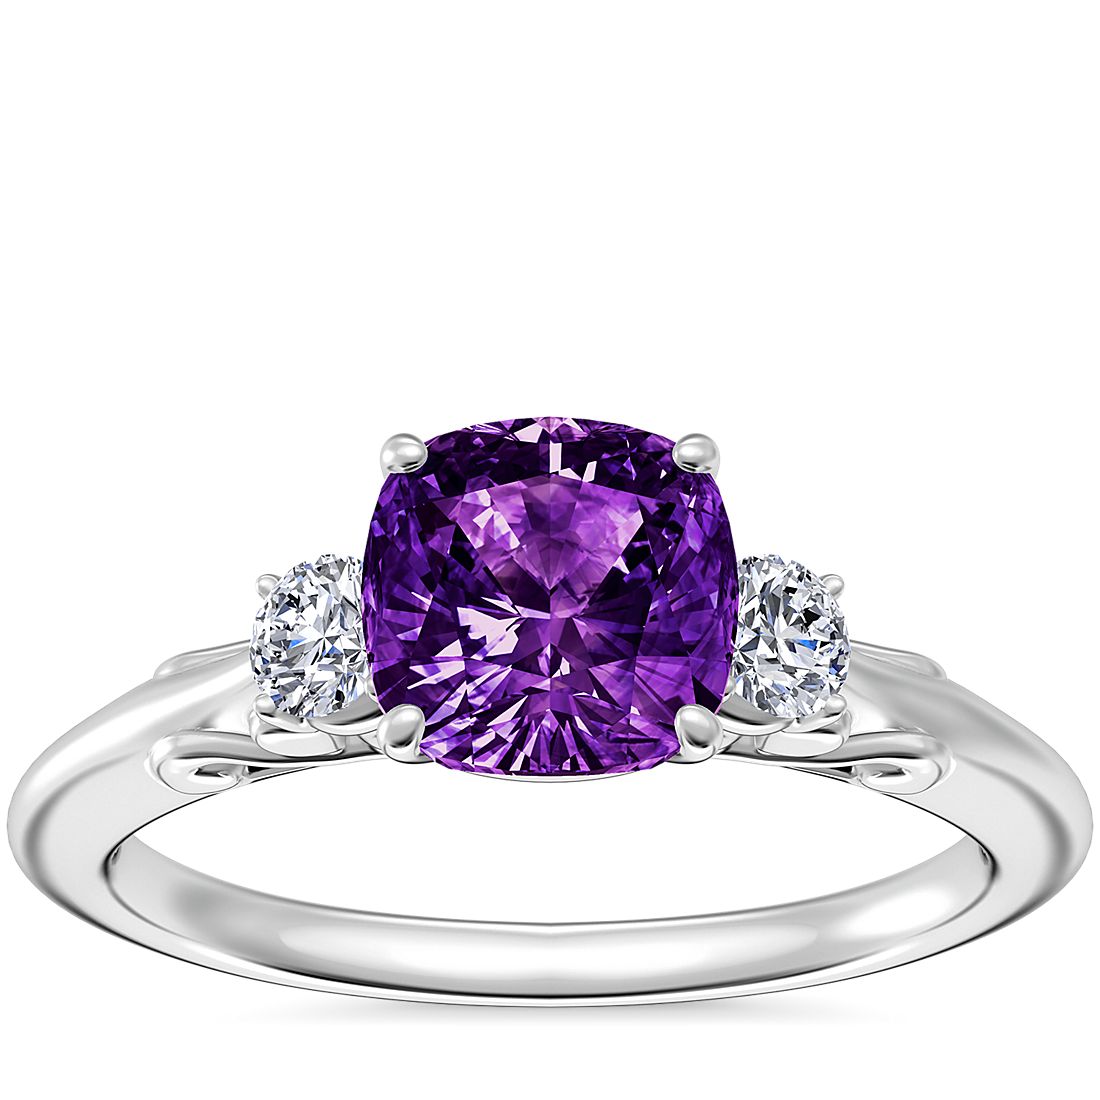 Vintage Three Stone Engagement Ring with Cushion Amethyst in Platinum (6.5mm)